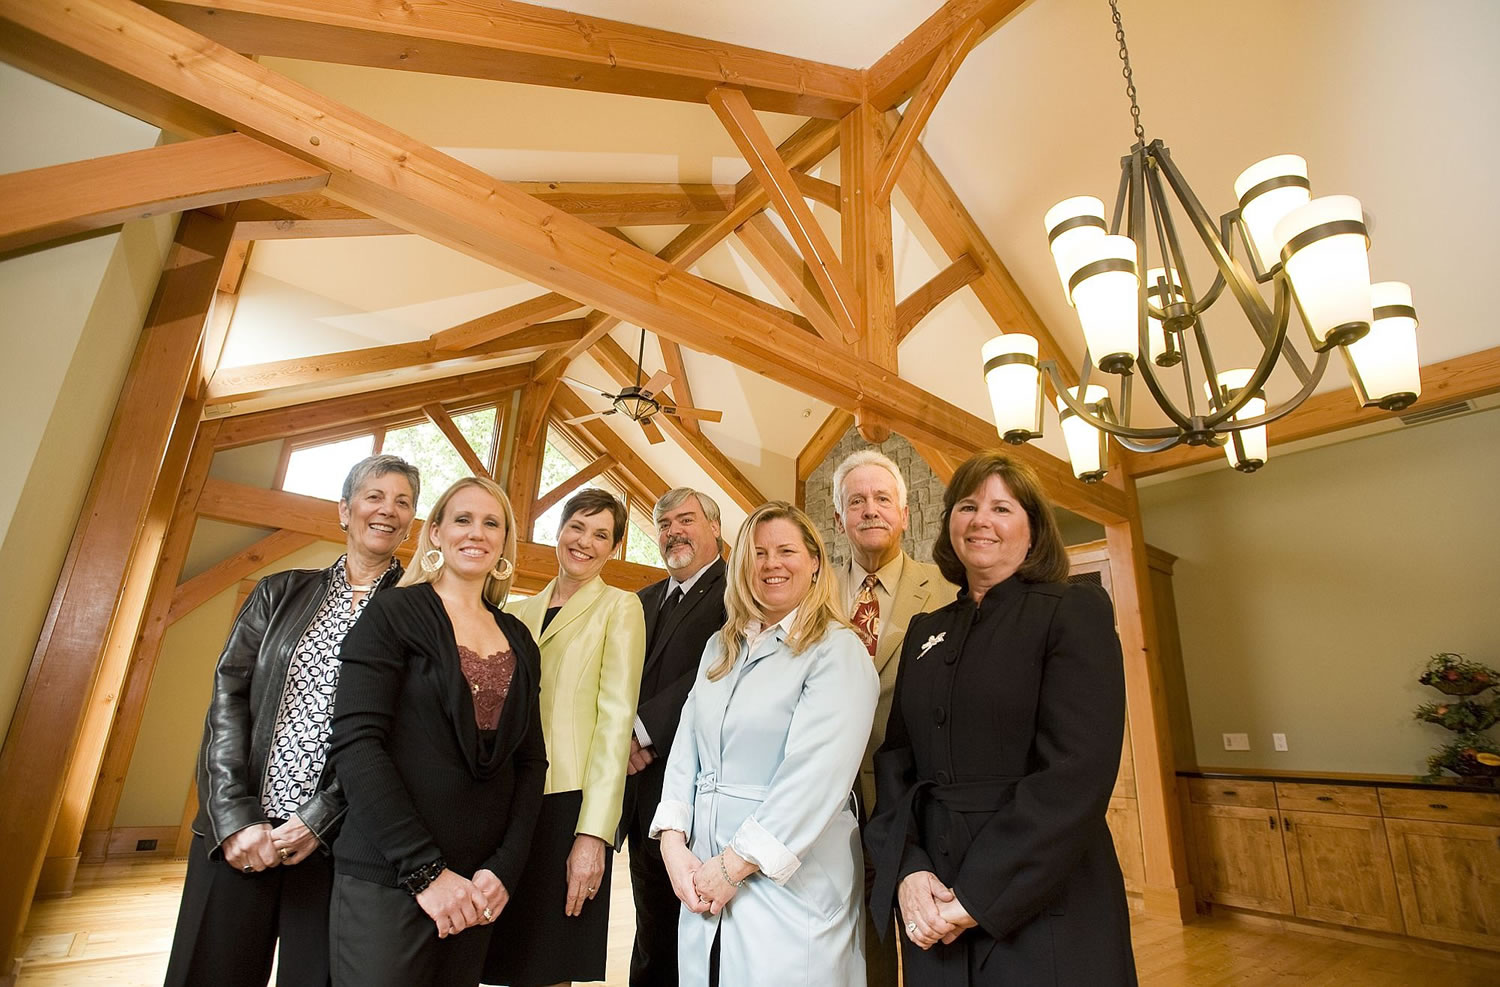 Linda Horowitz, from left, Katie Lingo, Sue Logan, Ed Faulk, Shawn Sturos, Ray Borde and Jodie Sharp are among the brokers who have banded together to create the Greater Vancouver Luxury Homes Group.